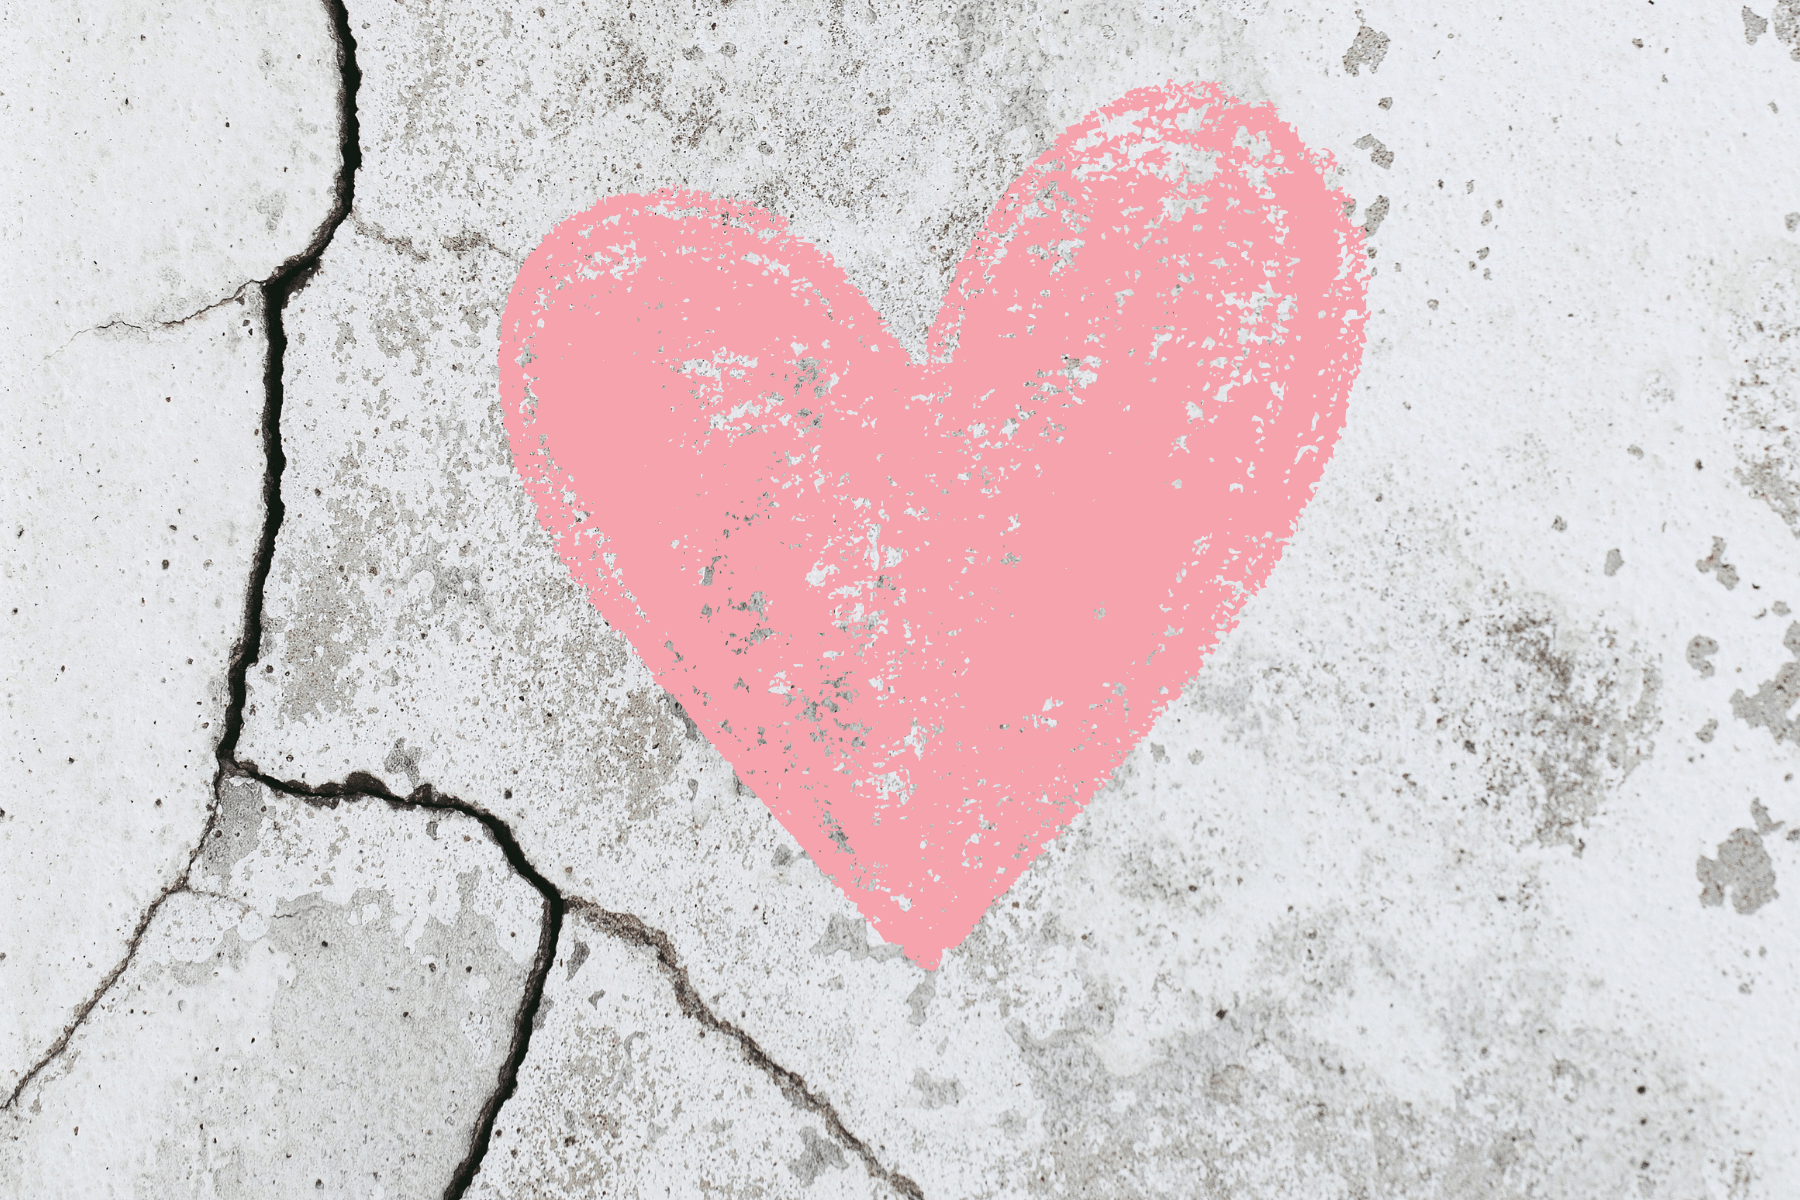 Picture of a heart drawn on cracked concrete